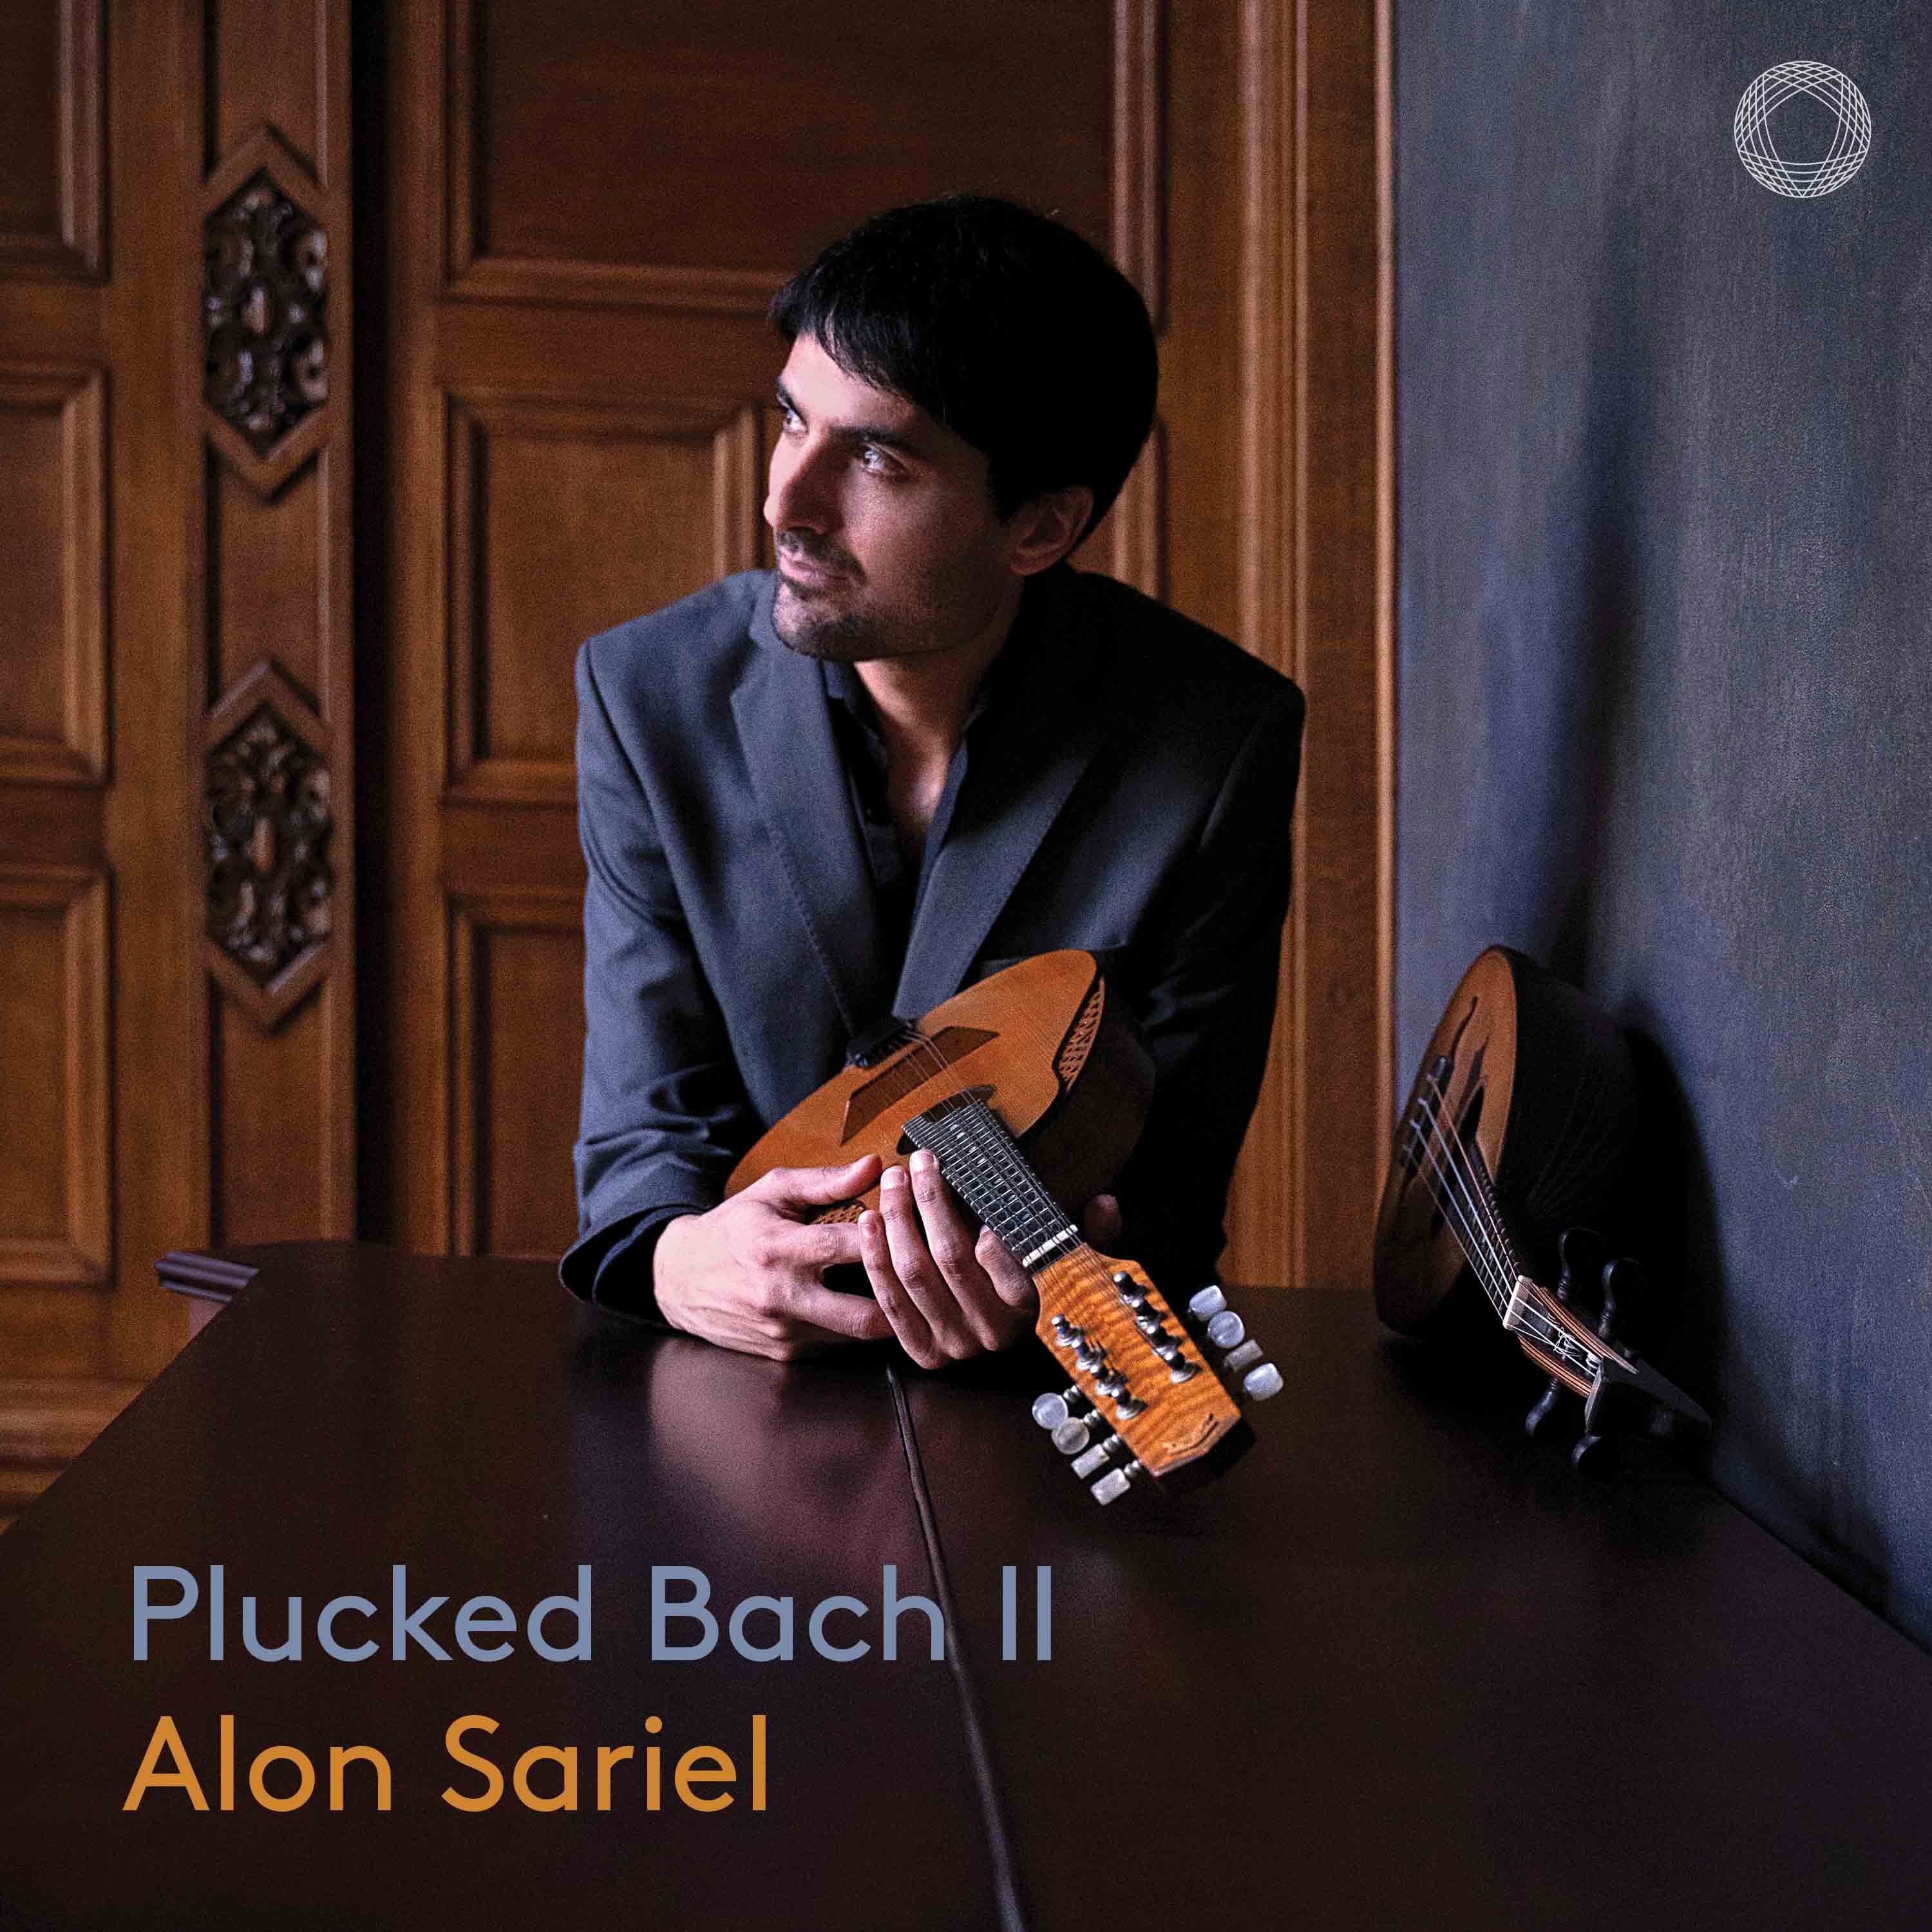 Plucked Bach II (A. Sariel)